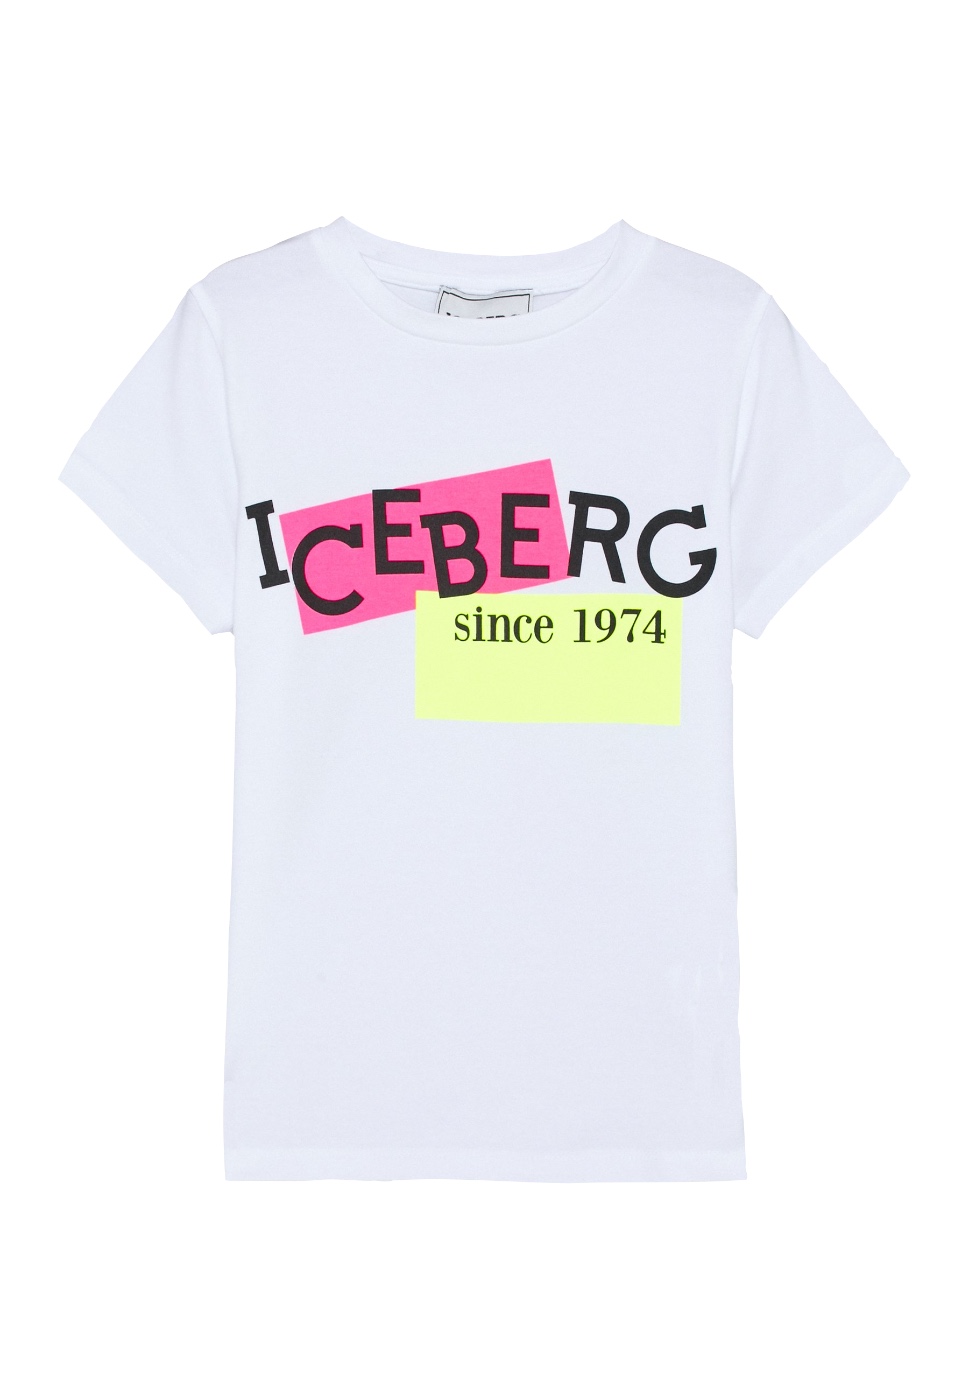 Featured image for “ICEBERG T-SHIRT CON STAMPA”